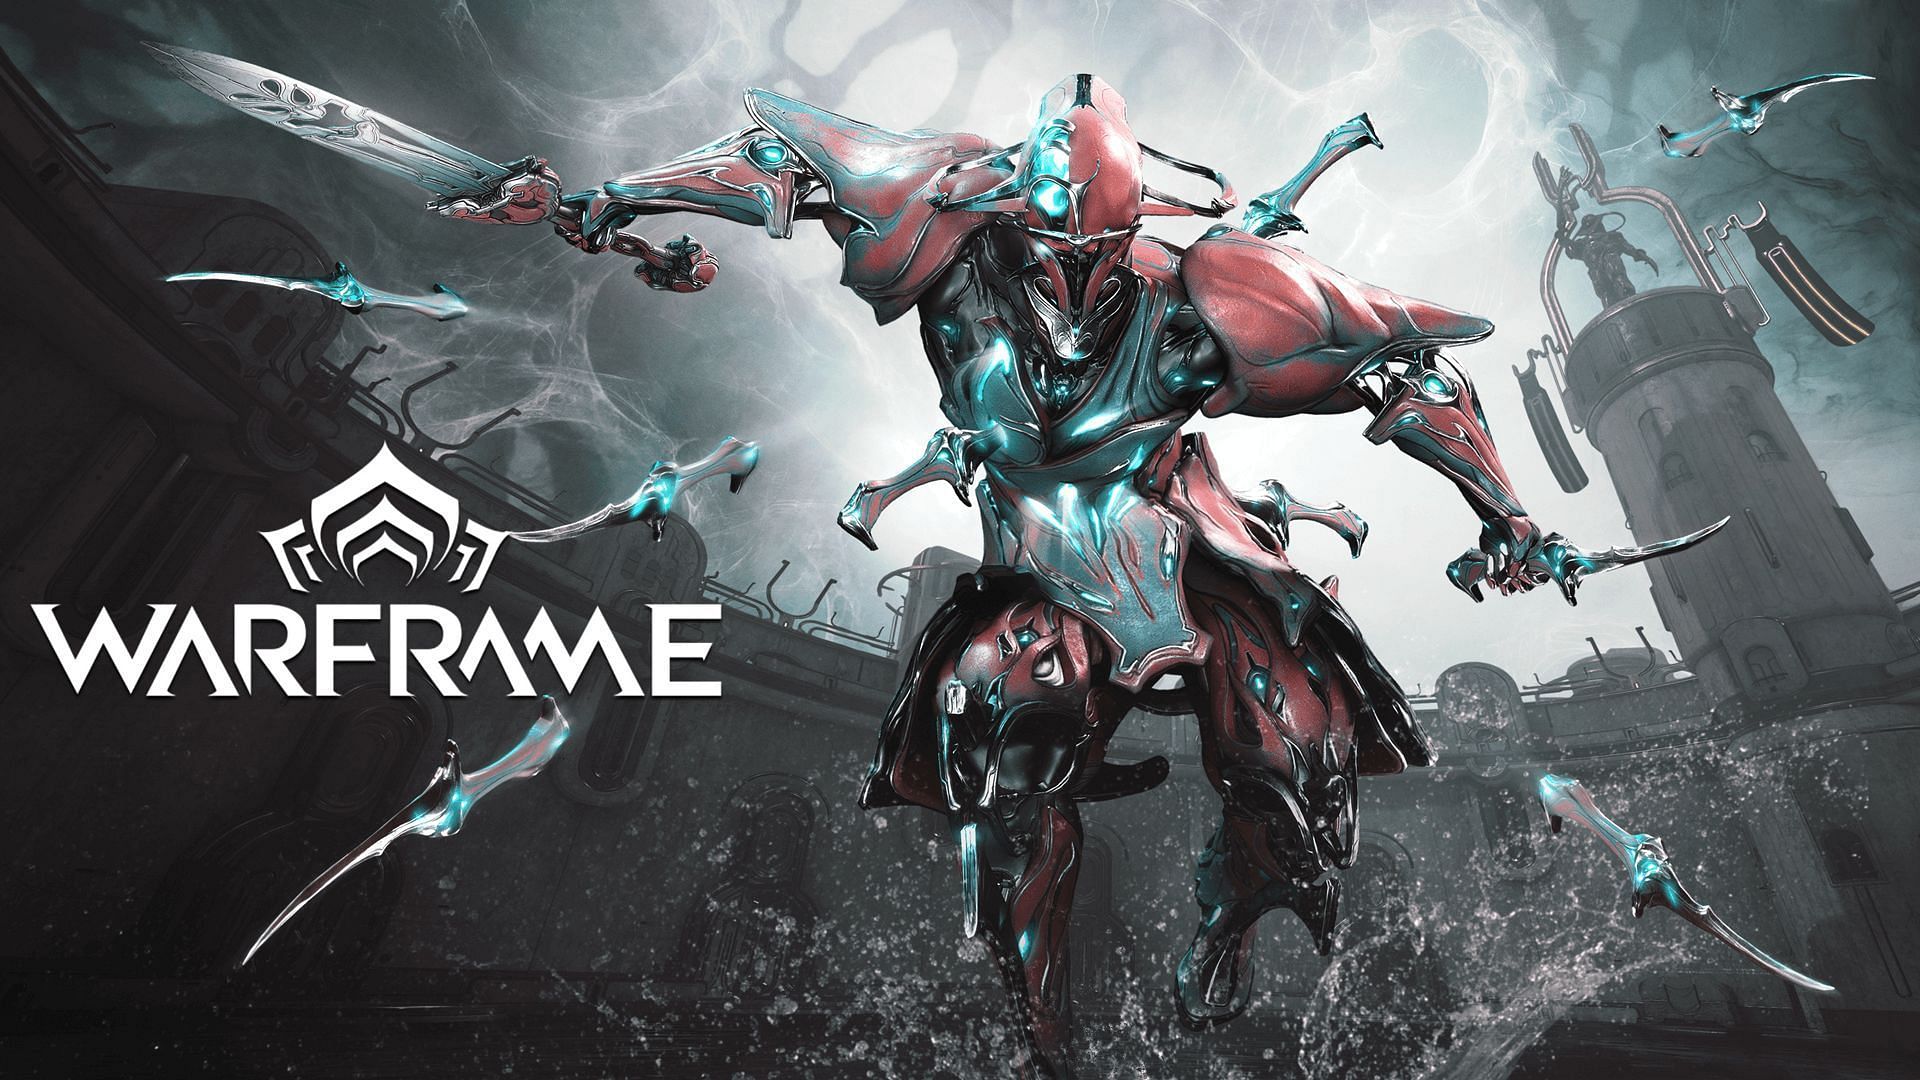 Kullervo can deal damage in a wide range and has Overguard (Image via Digital Extremes)